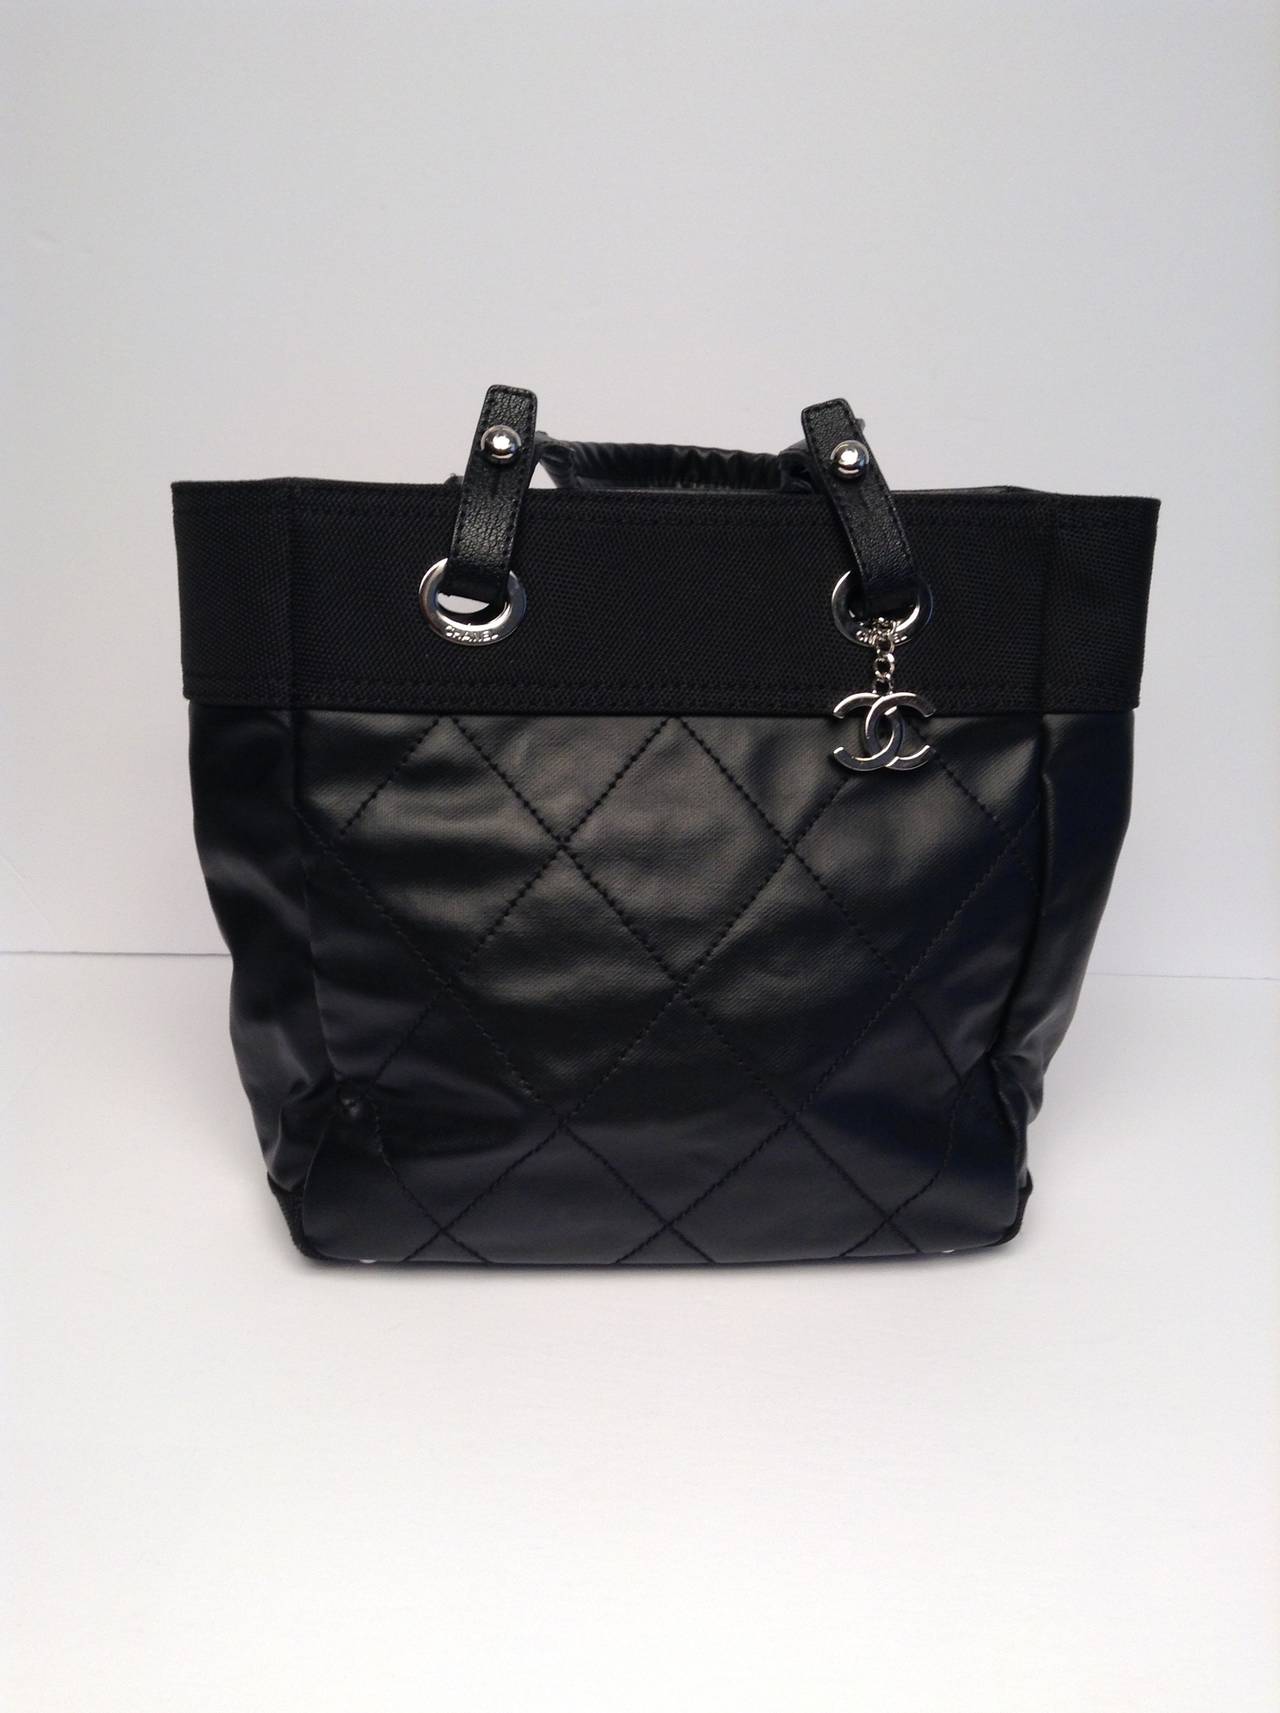 This is an authentic CHANEL Coated Canvas Paris Biarritz Tote in Black. This super-chic tote is crafted of diamond stitched coated canvas. The bag features tall leather strap top handles with silver hardware including a hanging Chanel CC medallion,